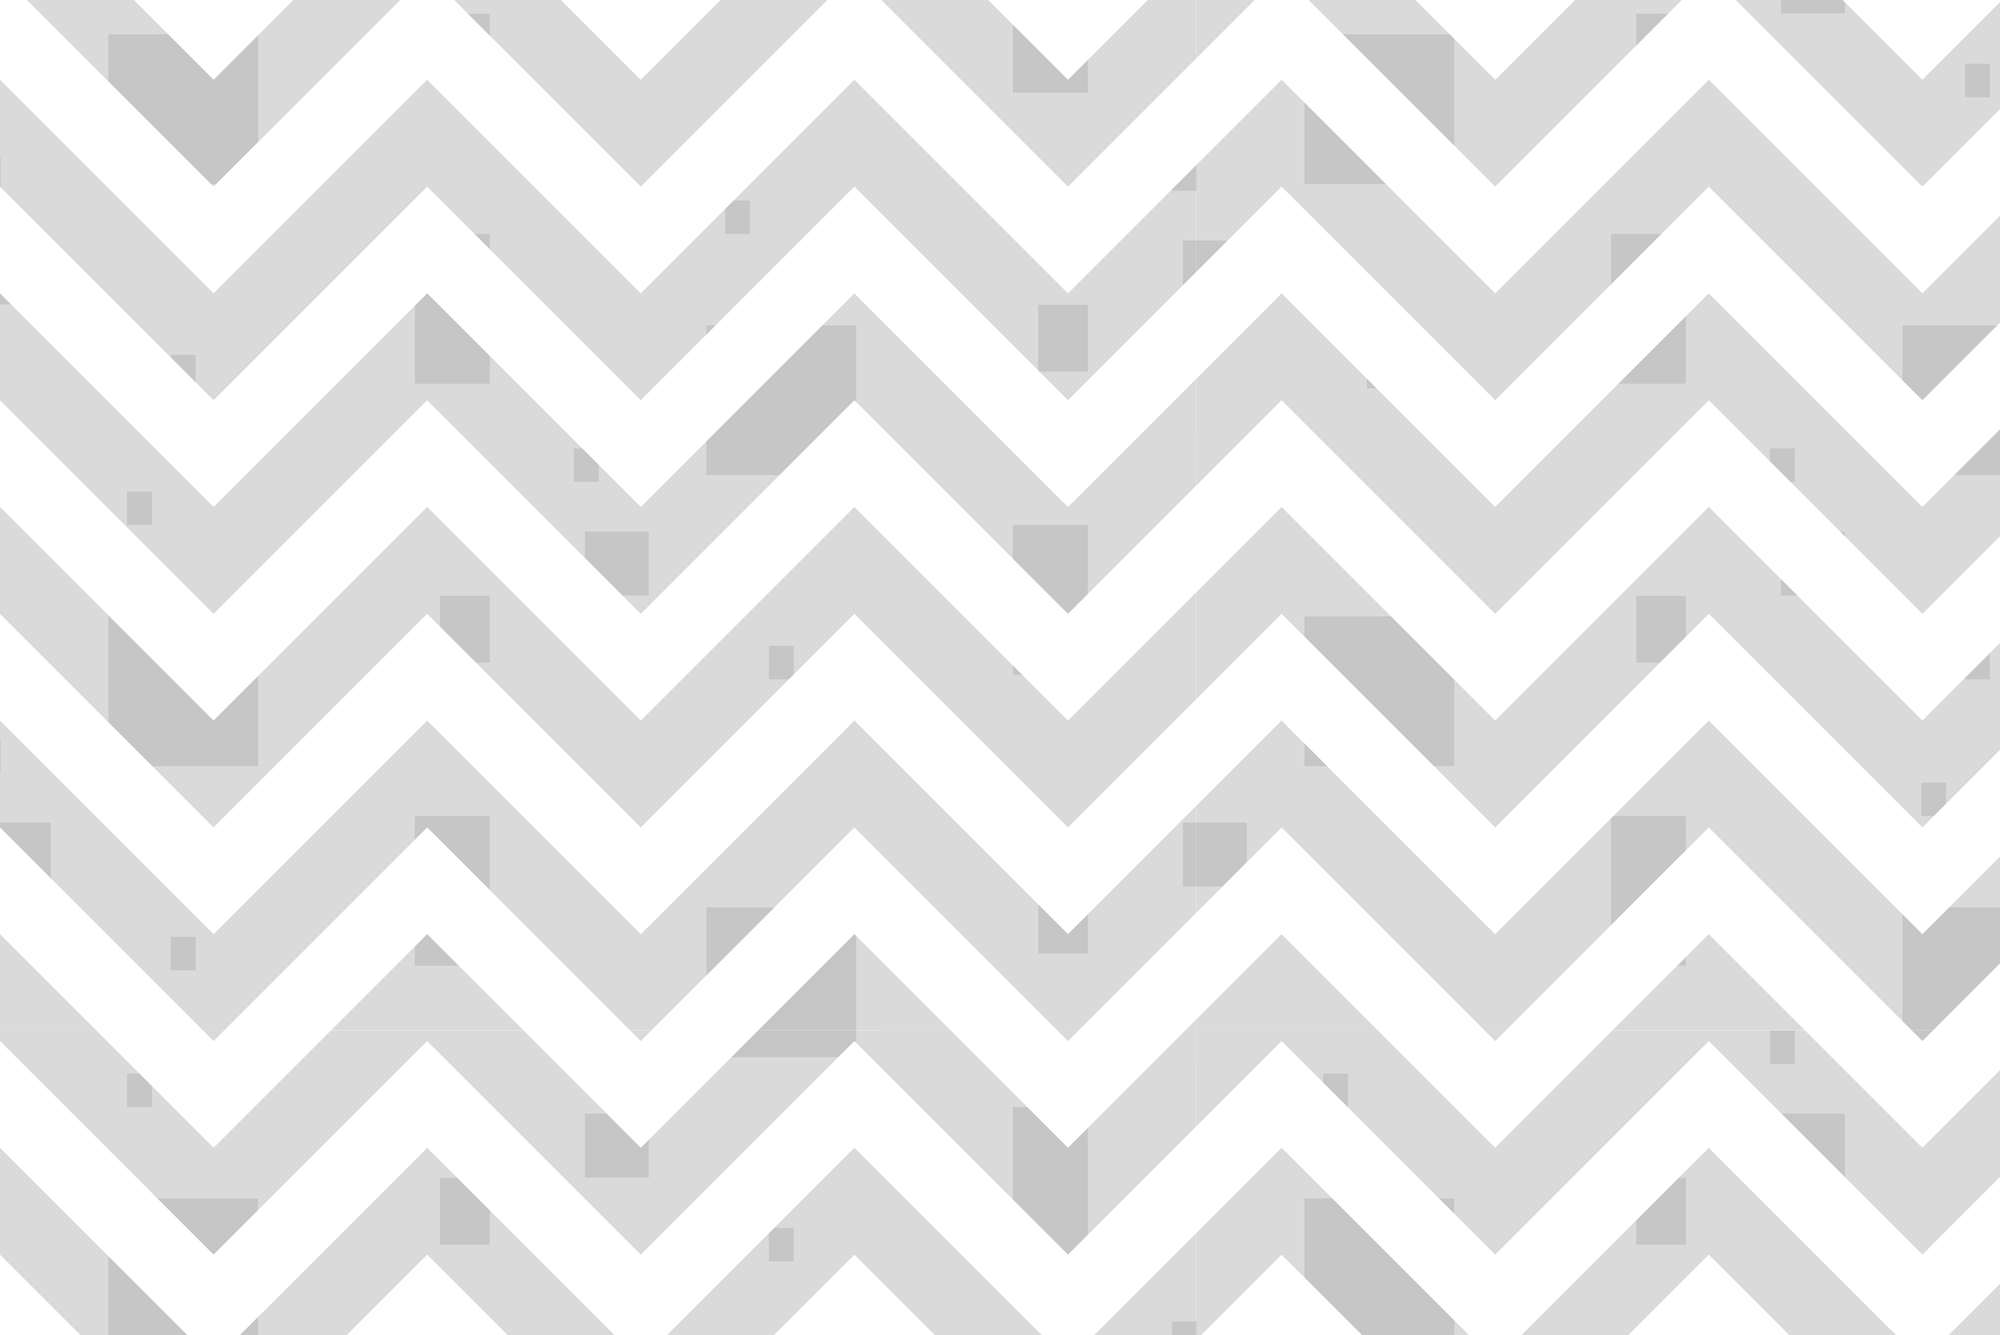             Design wallpaper zig zag pattern with small squares grey on mother of pearl smooth nonwoven
        